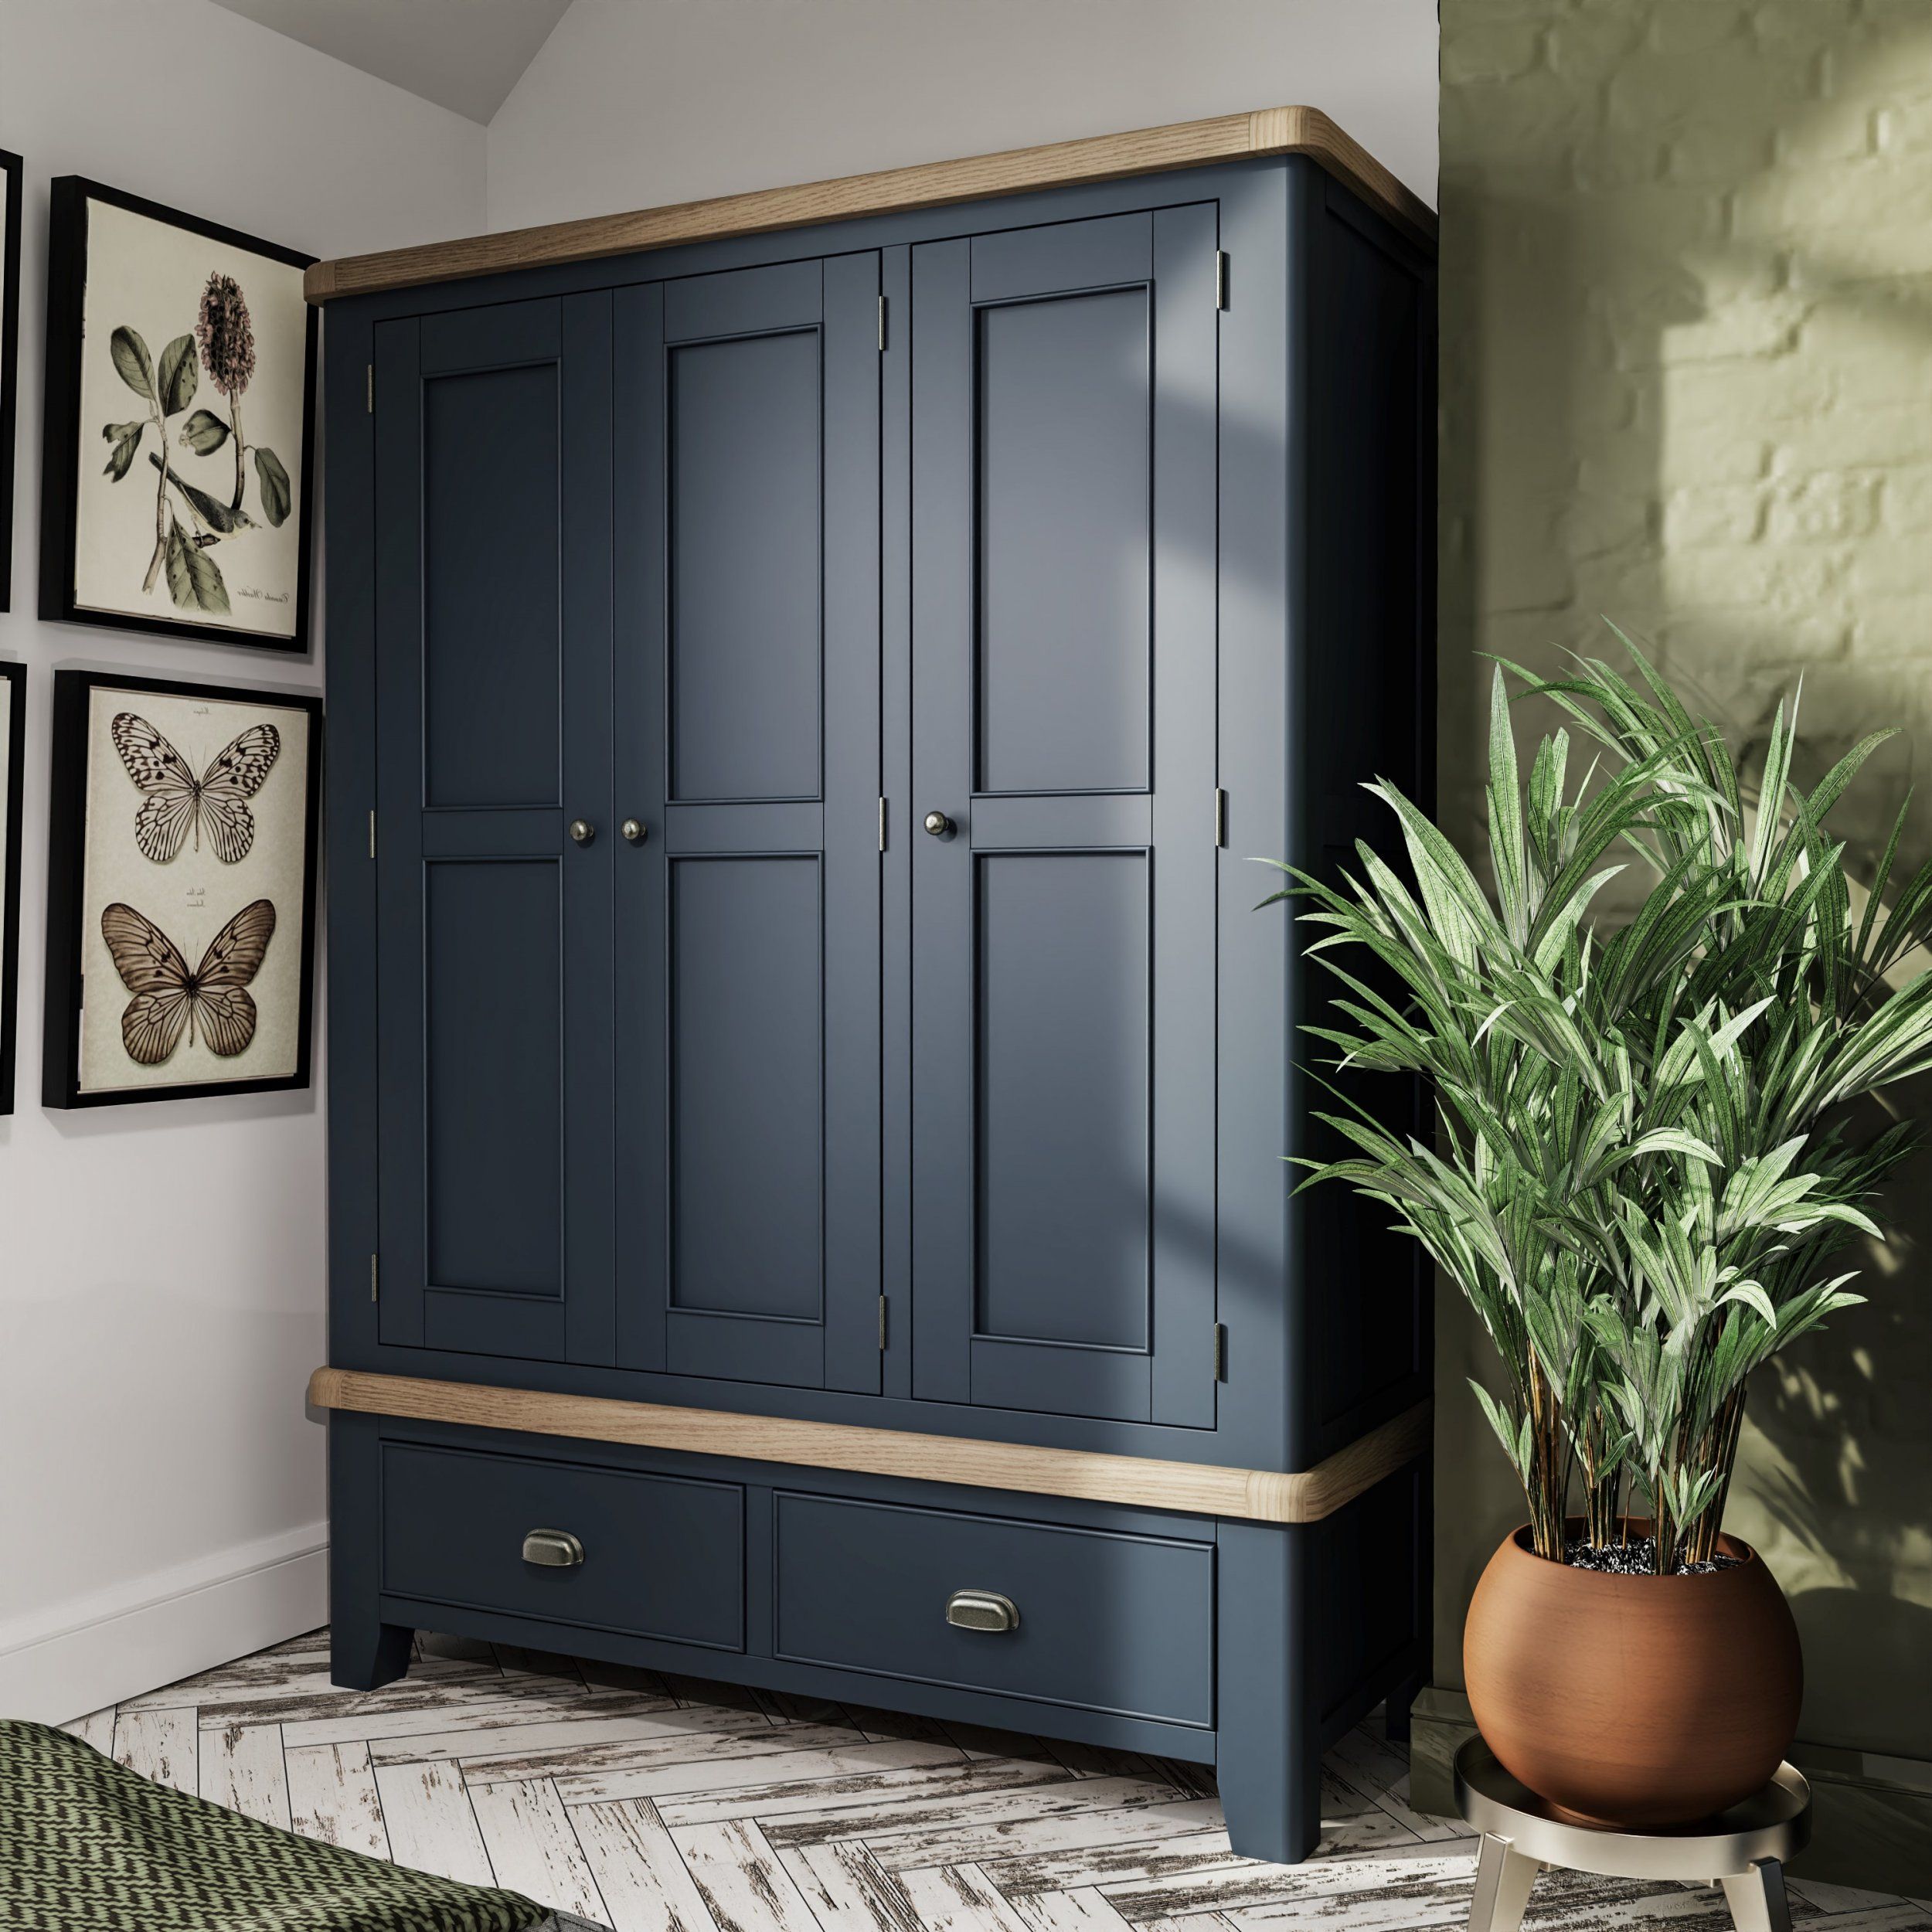 Haxby Oak Painted Bedroom 3 Door Wardrobe – Blue | The Clearance Zone Intended For Bargain Wardrobes (View 6 of 15)